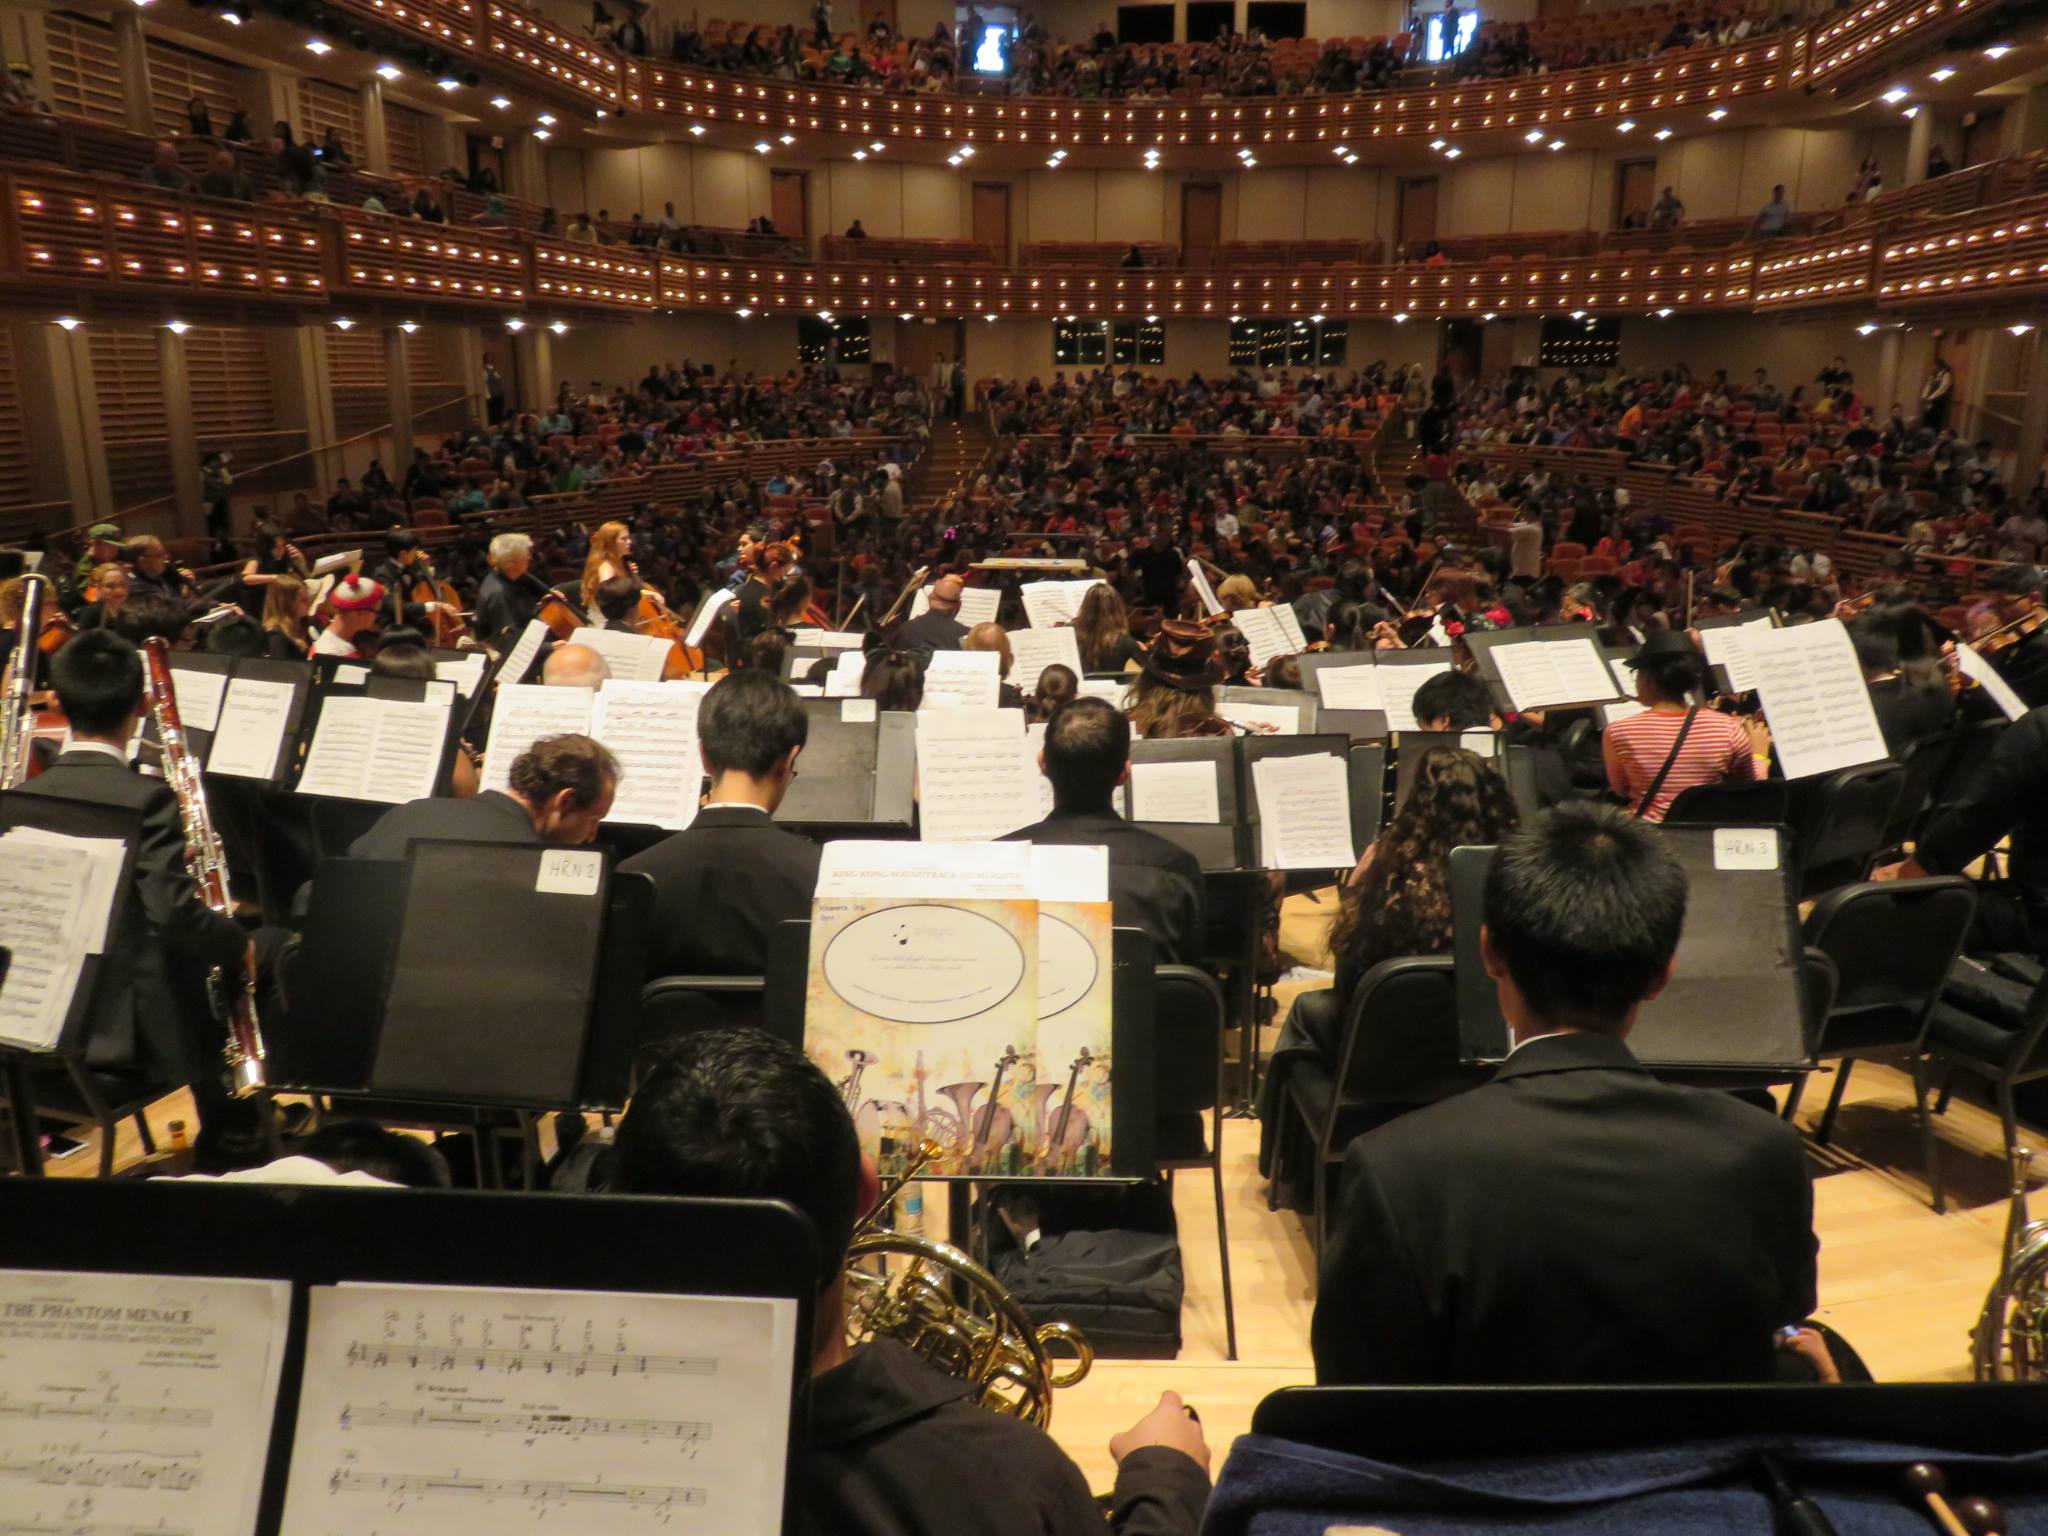 The Alhambra Orchestra Performs at The Adrienne Arsht Center for the Performing Arts